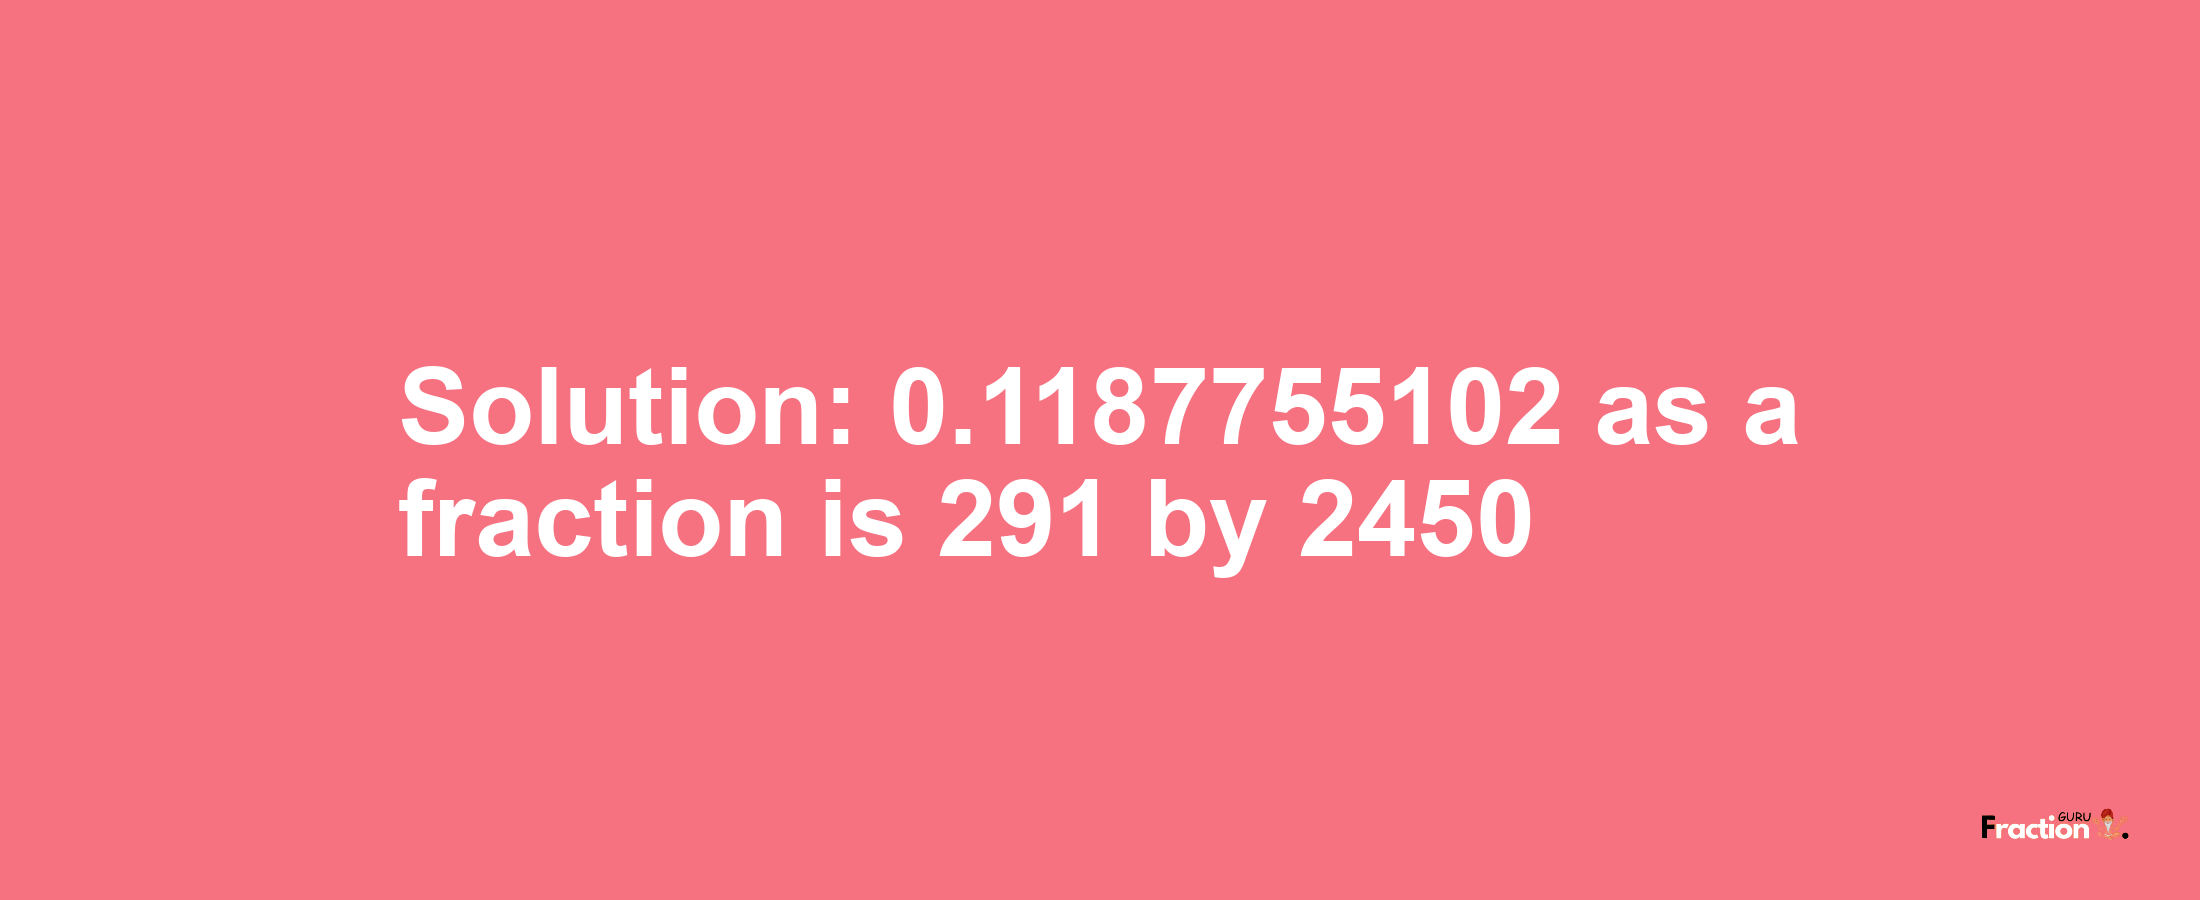 Solution:0.1187755102 as a fraction is 291/2450